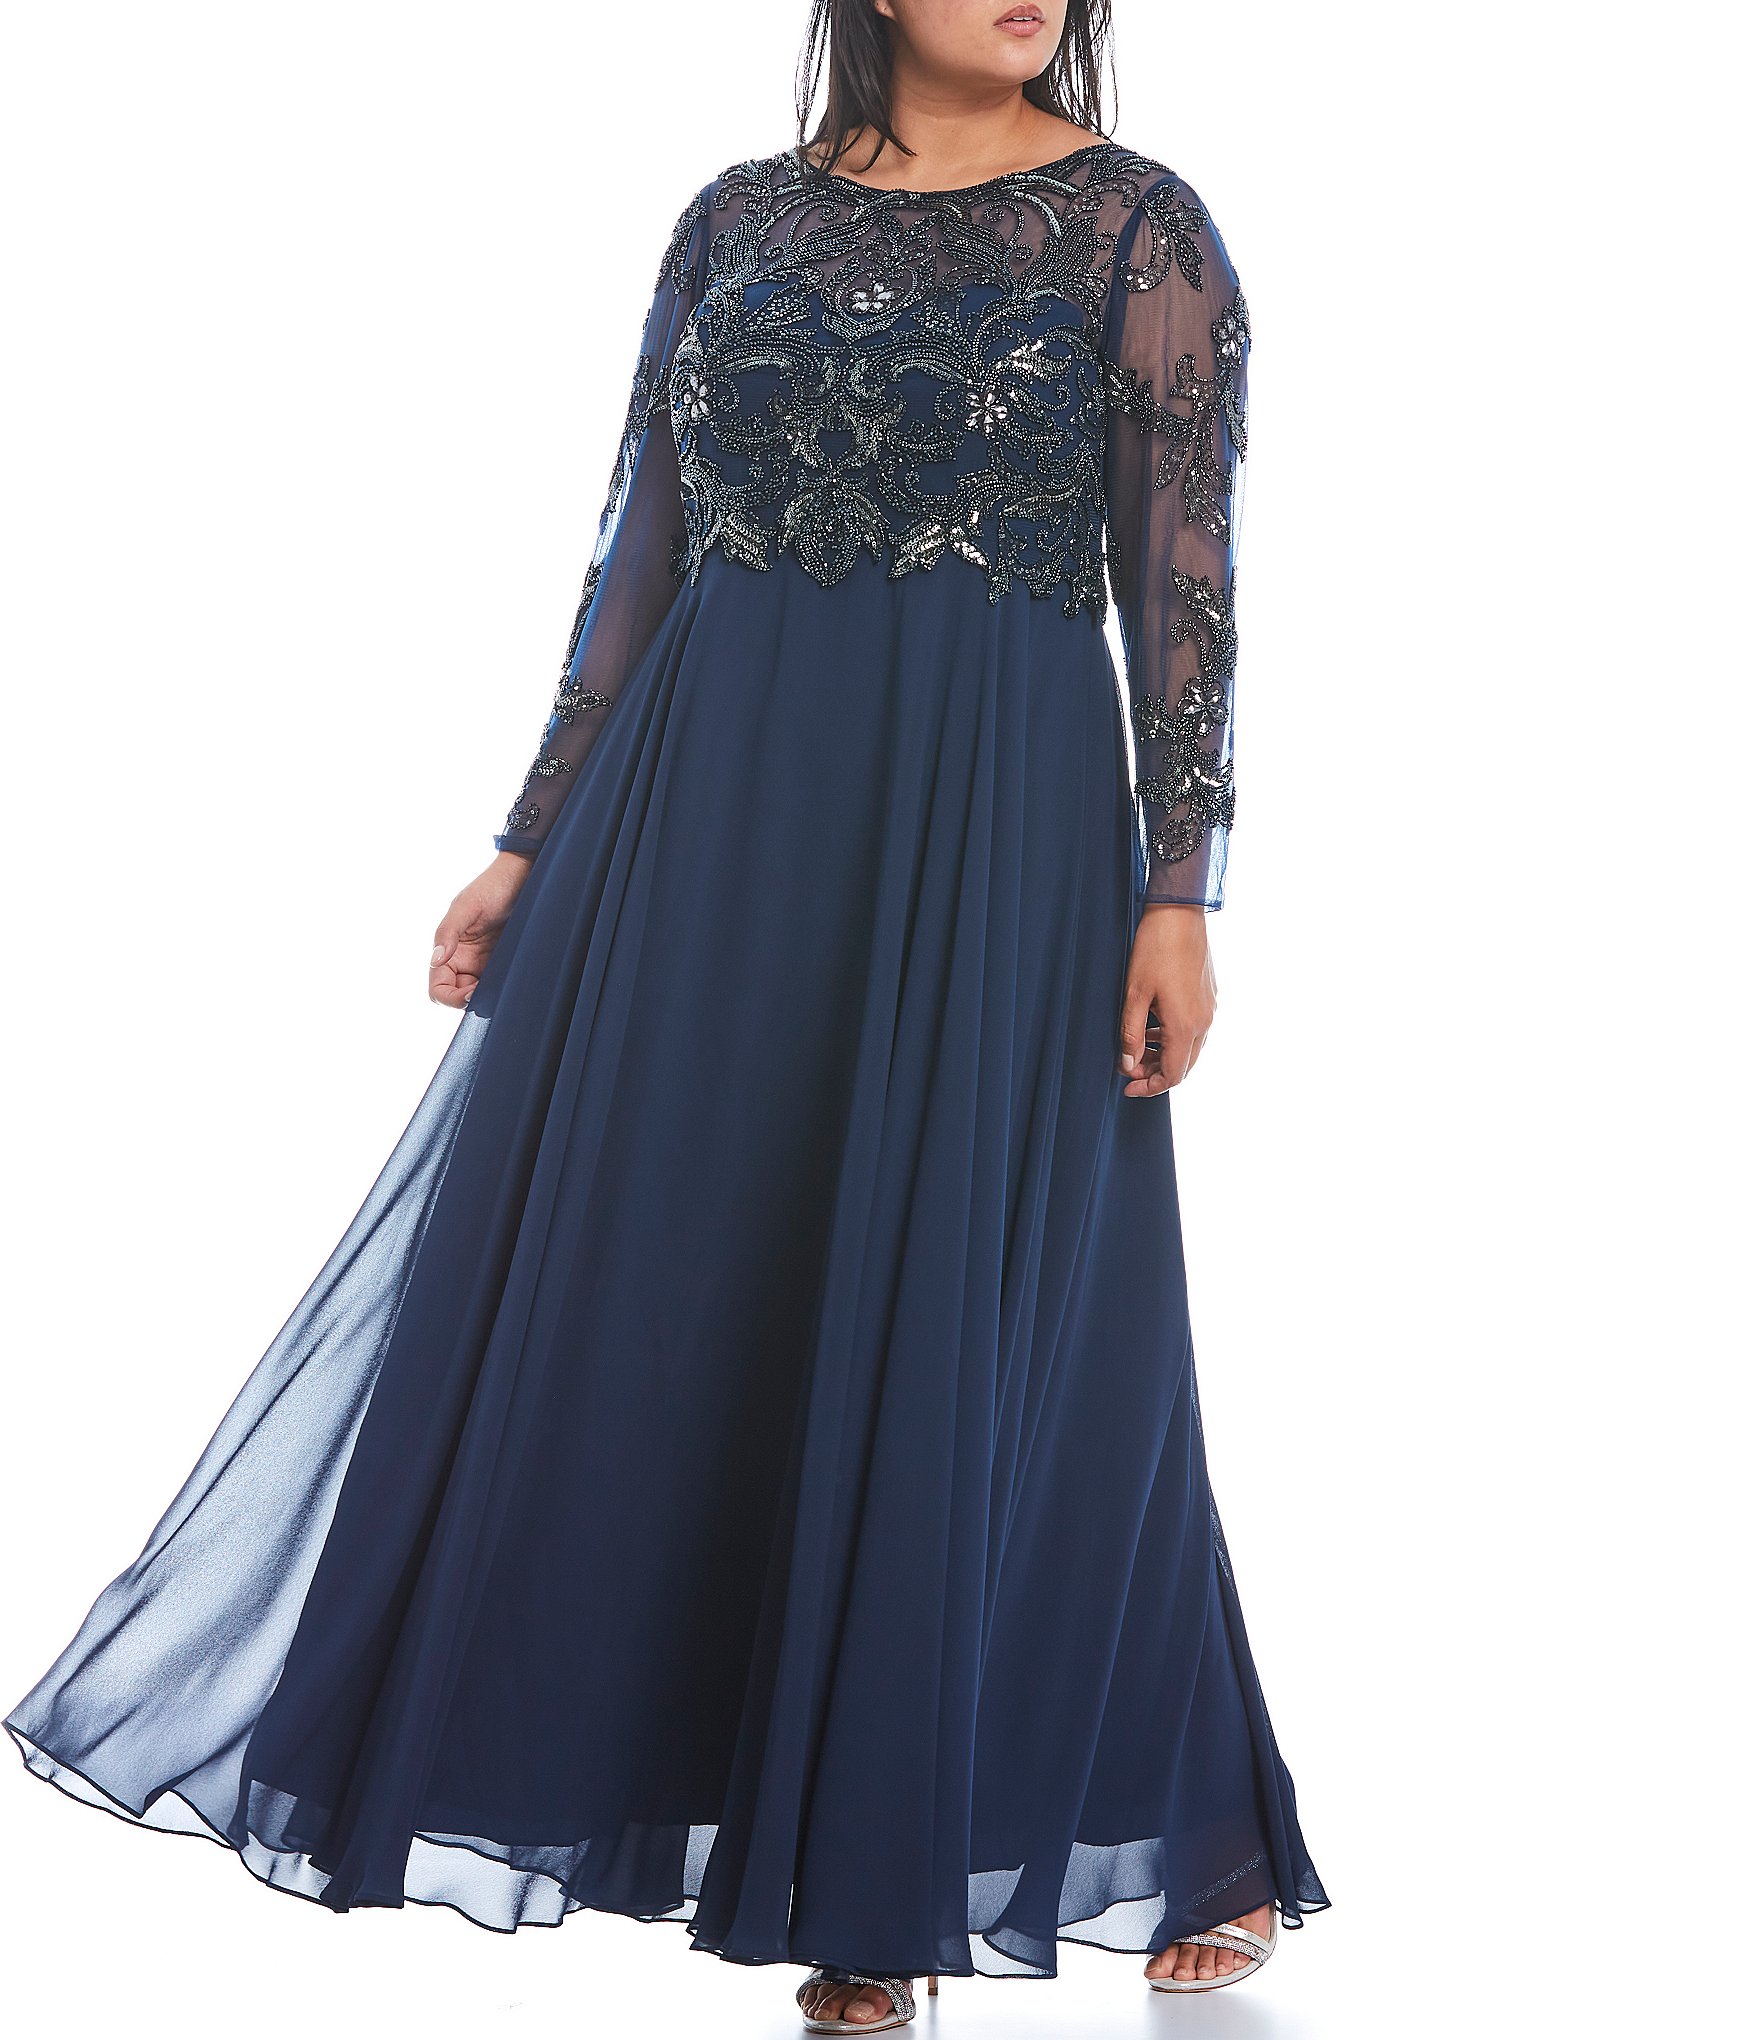 Shop for Xscape Plus Size Jewel Neck Long Sleeve Beaded Bodice Chiffon Gown at Dillard's. Visit Dillard's to find clothing, accessories, shoes, cosmetics & more. The Style of Your Life.